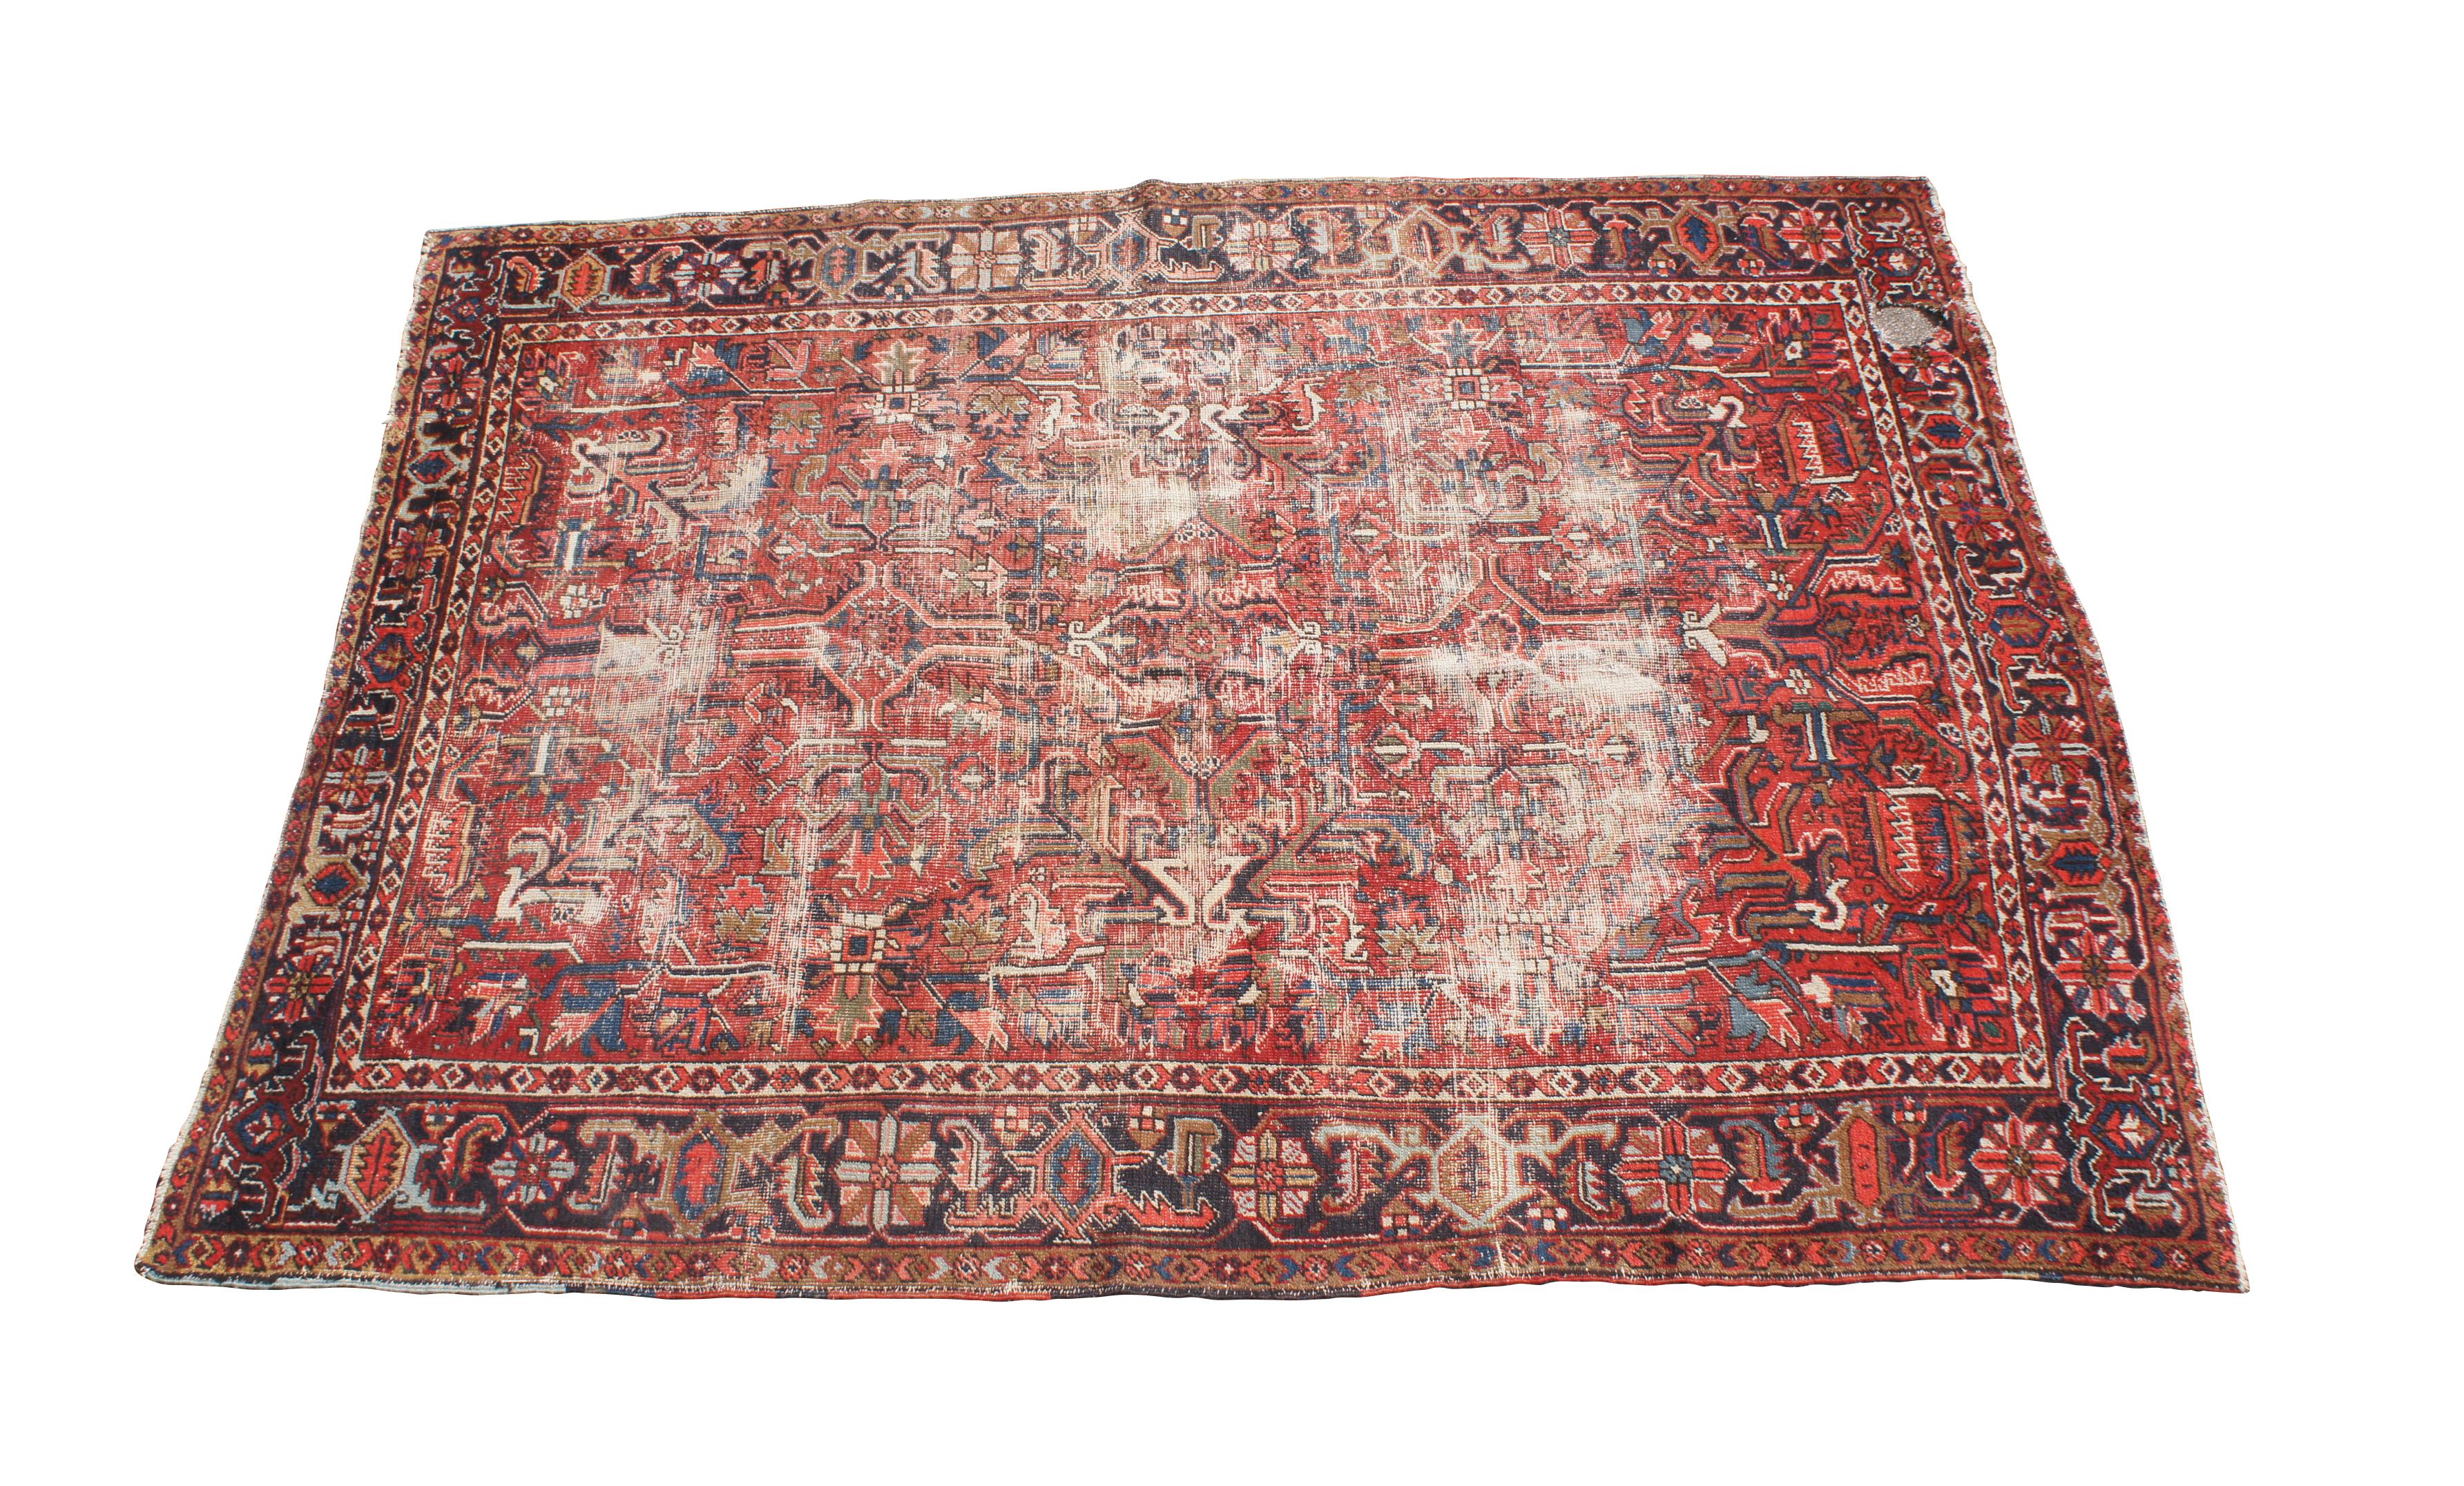 Semi-Antique oriental carpet.  Features traditional floral motifs in red with beige and brown accents.

Dimensions:
134